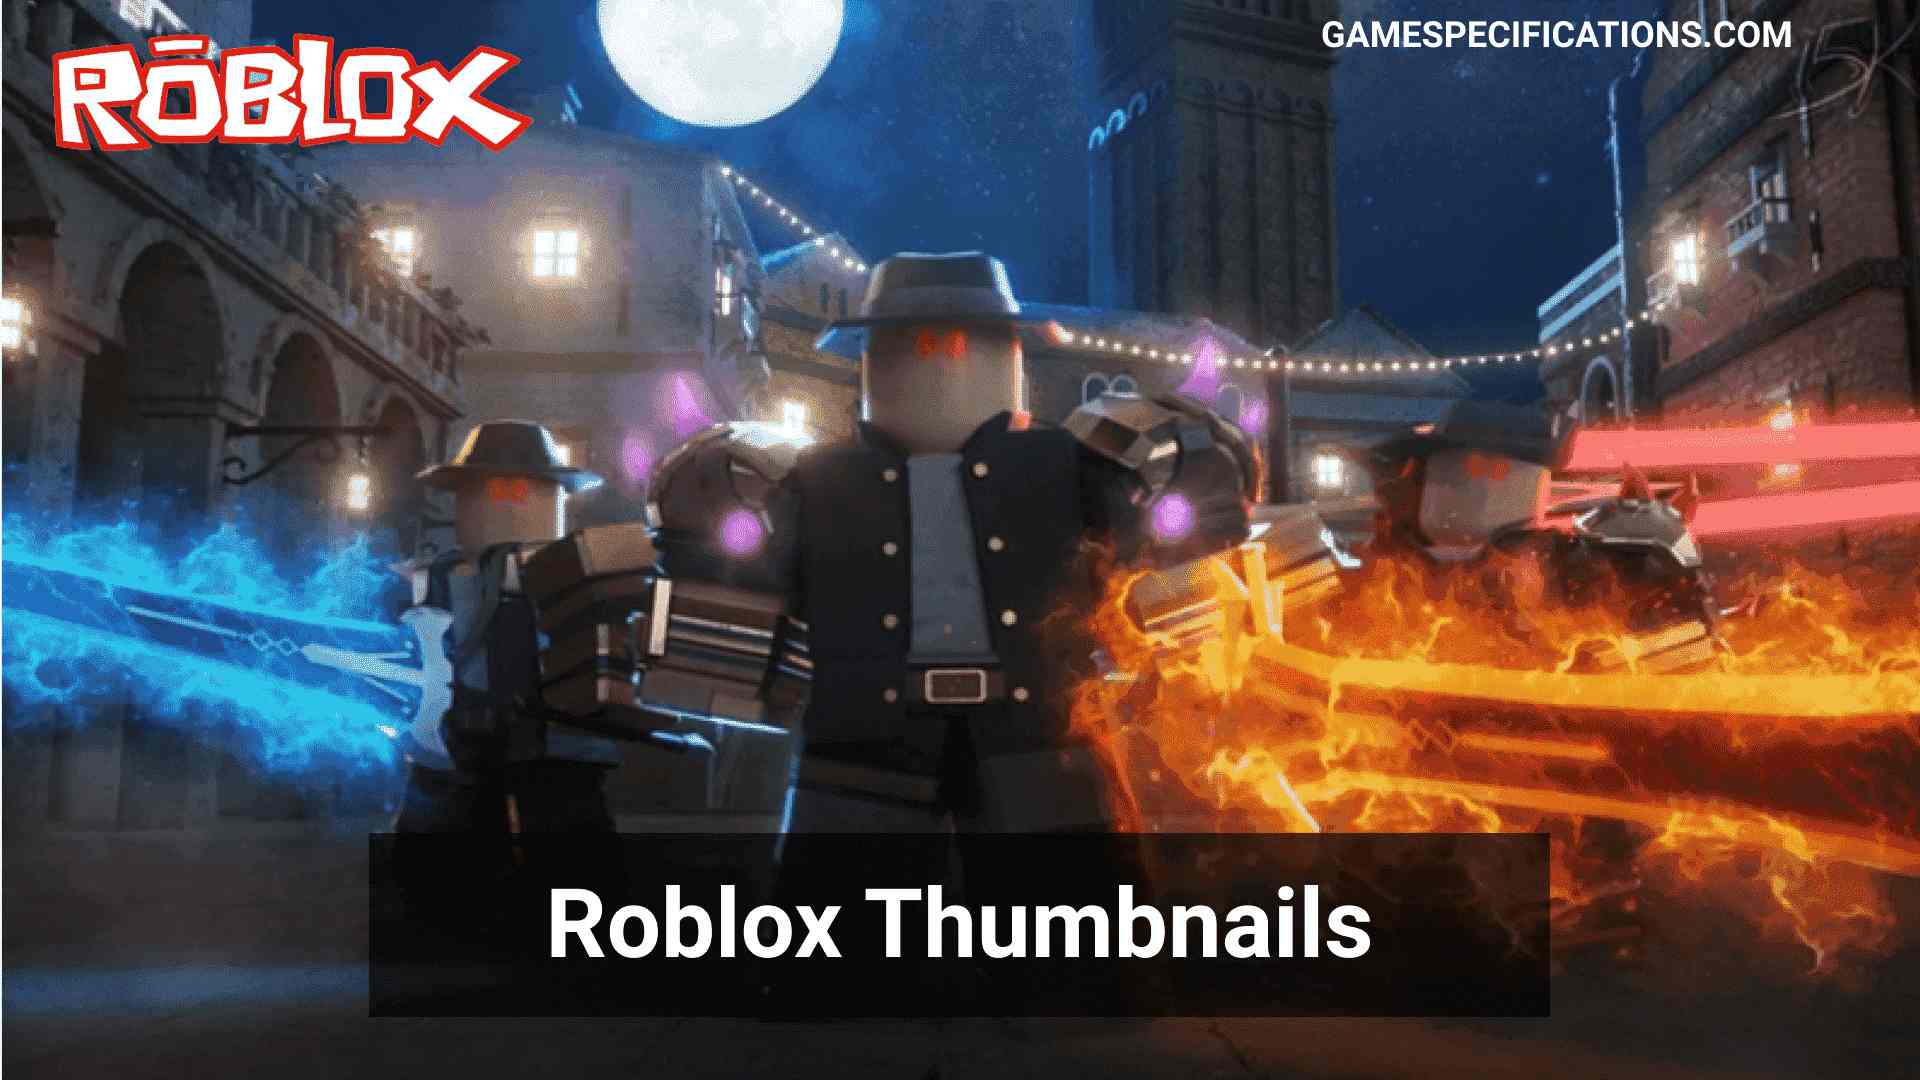 Roblox Thumbnails An Ultimate Guide On Awesome Thumbnails Generation 2021 Game Specifications - how to make thumbnails for roblox games